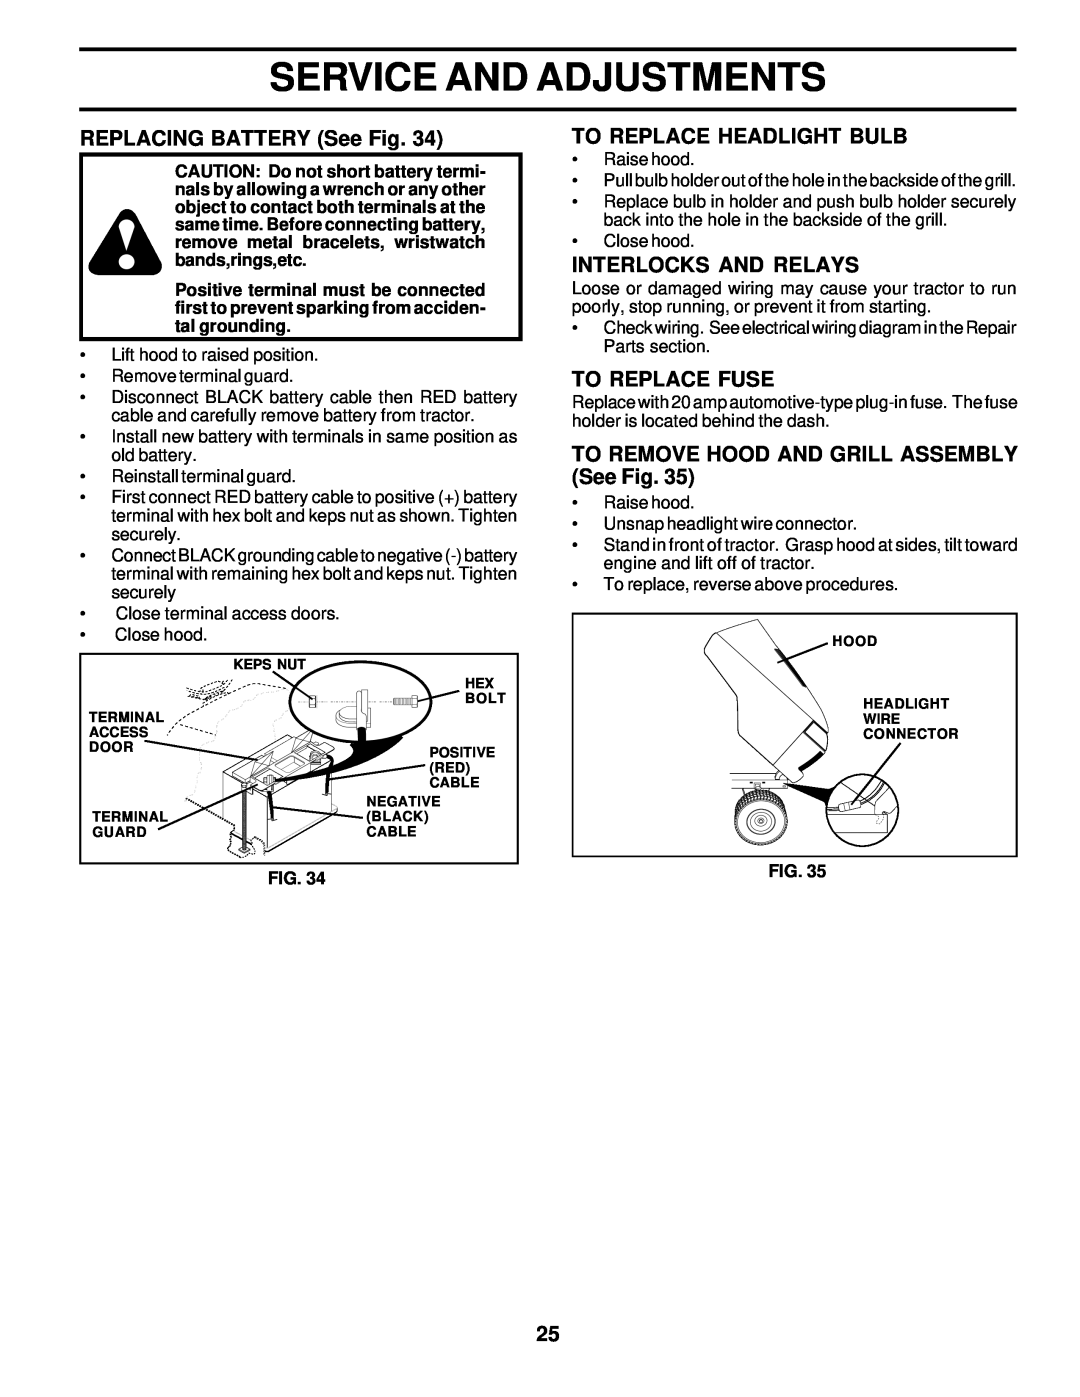 Poulan 178249 owner manual REPLACING BATTERY See Fig, To Replace Headlight Bulb, Interlocks And Relays, To Replace Fuse 